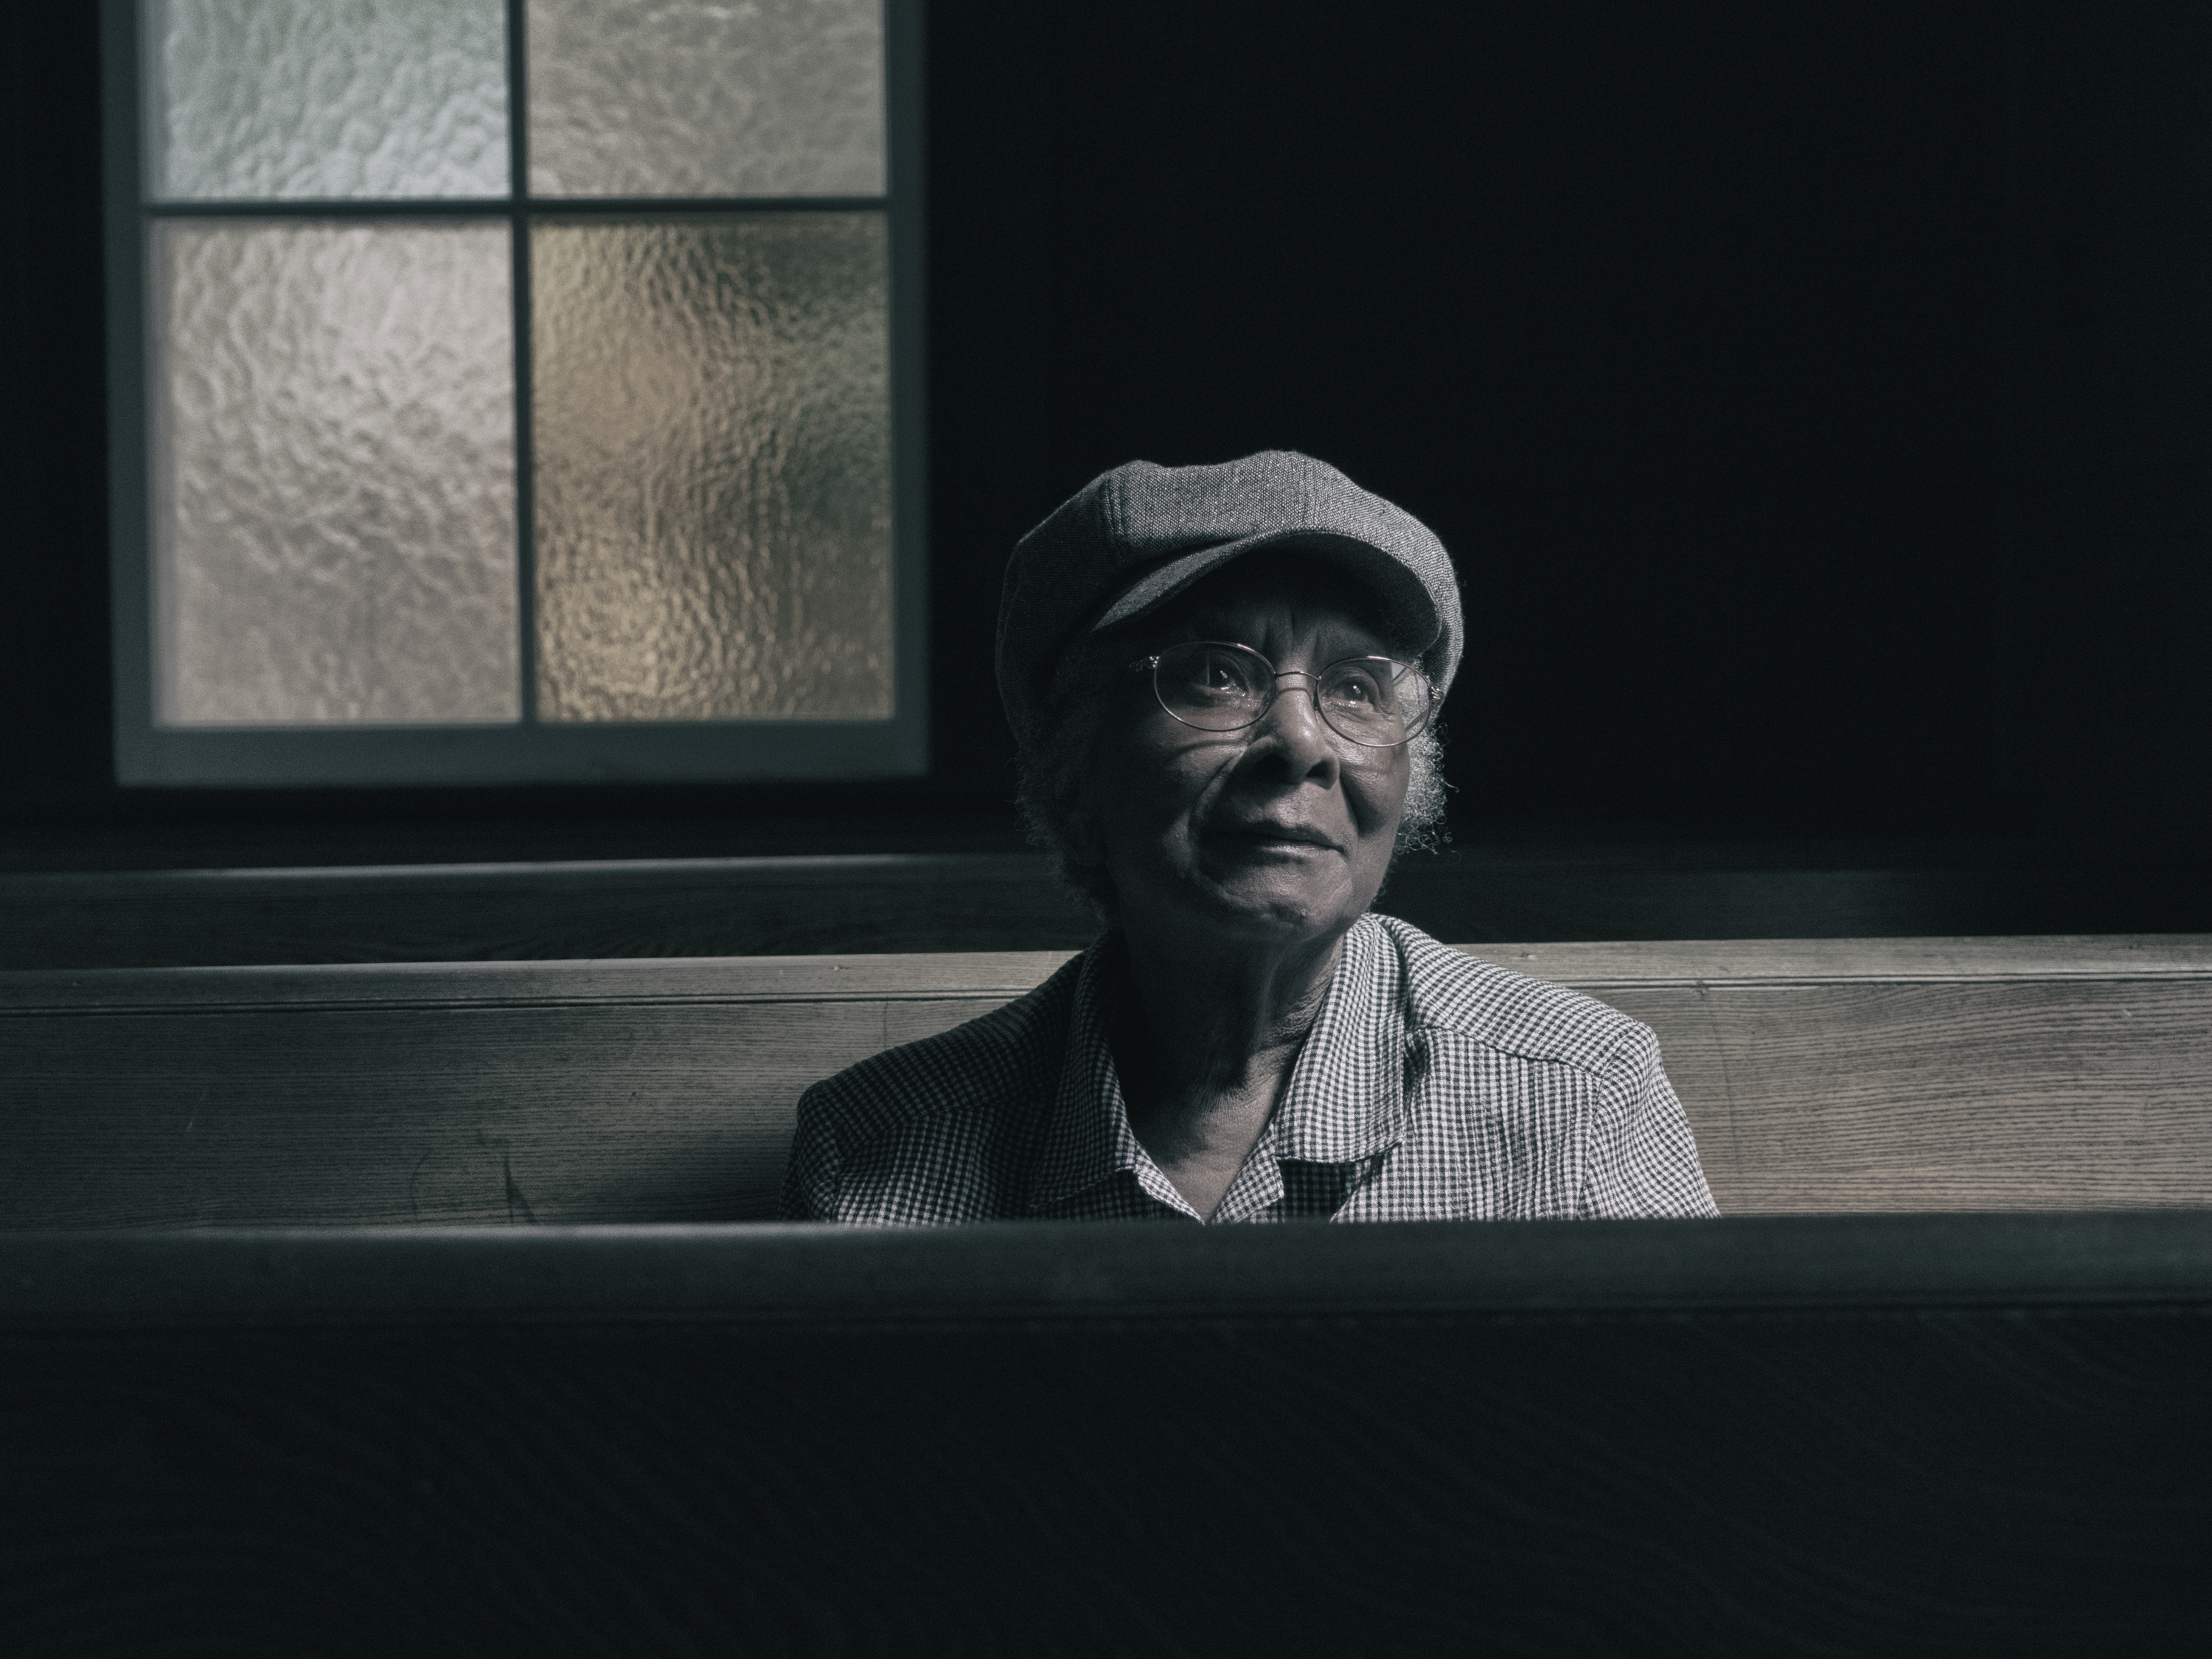 A woman sits within a wooden pew gazing up and to the right. She sits in a dark space with light shining over her face. A glass window is behind her right shoulder. She wears glasses, a gray hat, a checkered shirt, and has gazes softly into the distance.